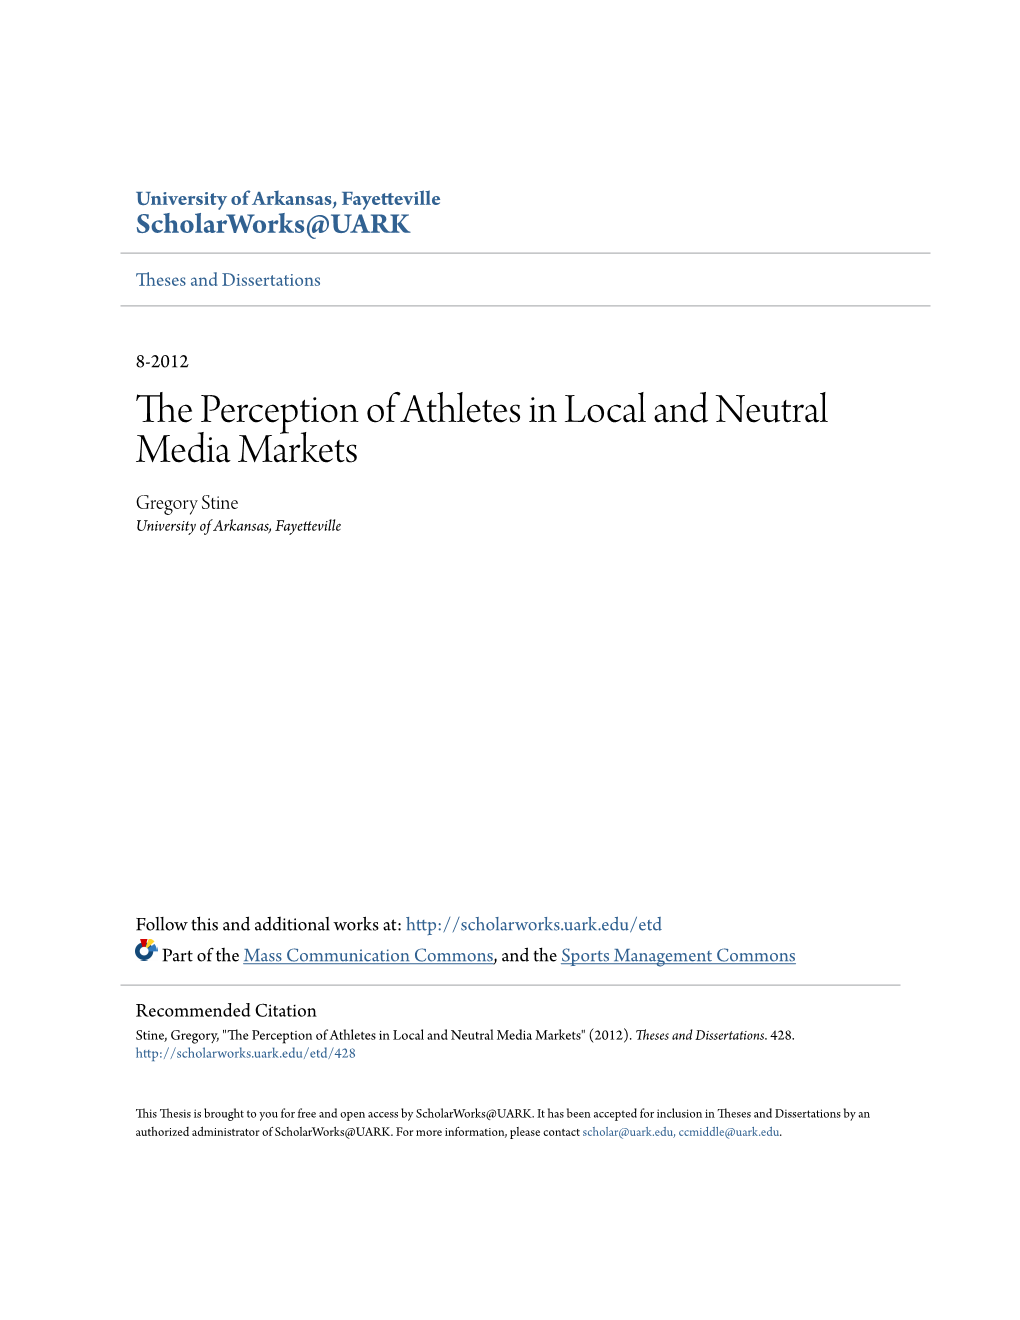 The Perception of Athletes in Local and Neutral Media Markets